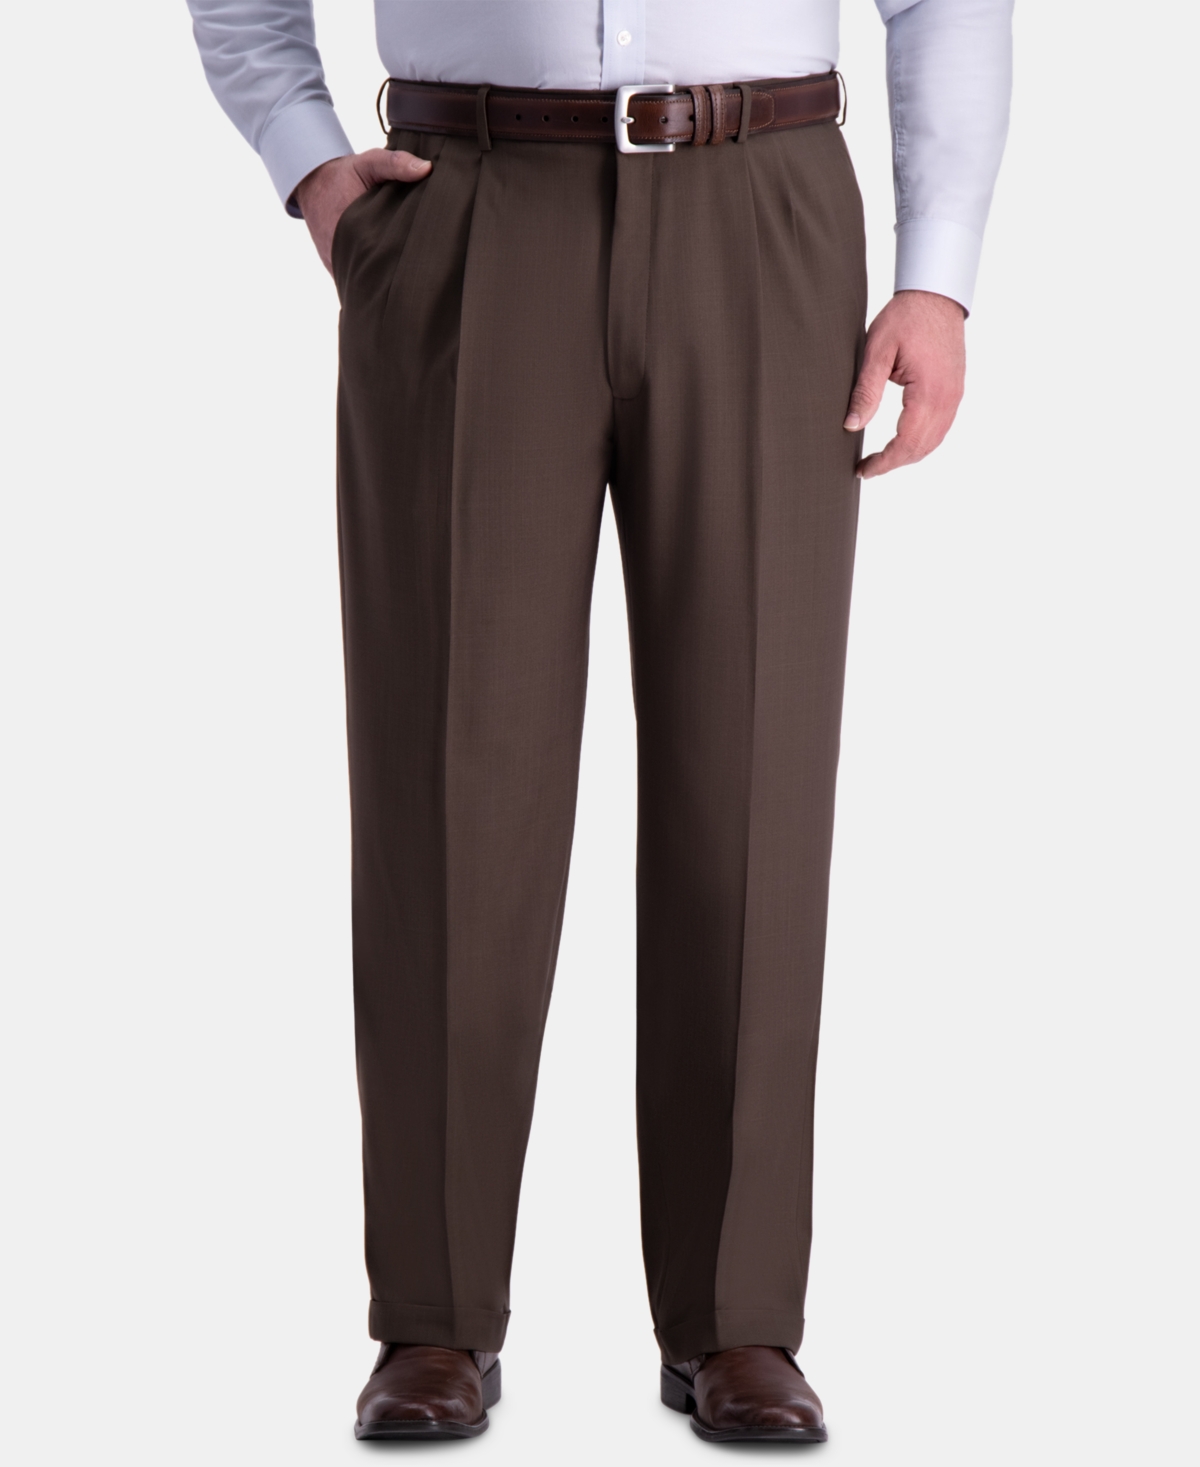 Men's Big & Tall Premium Comfort Stretch Classic-Fit Solid Pleated Dress Pants - Med Grey